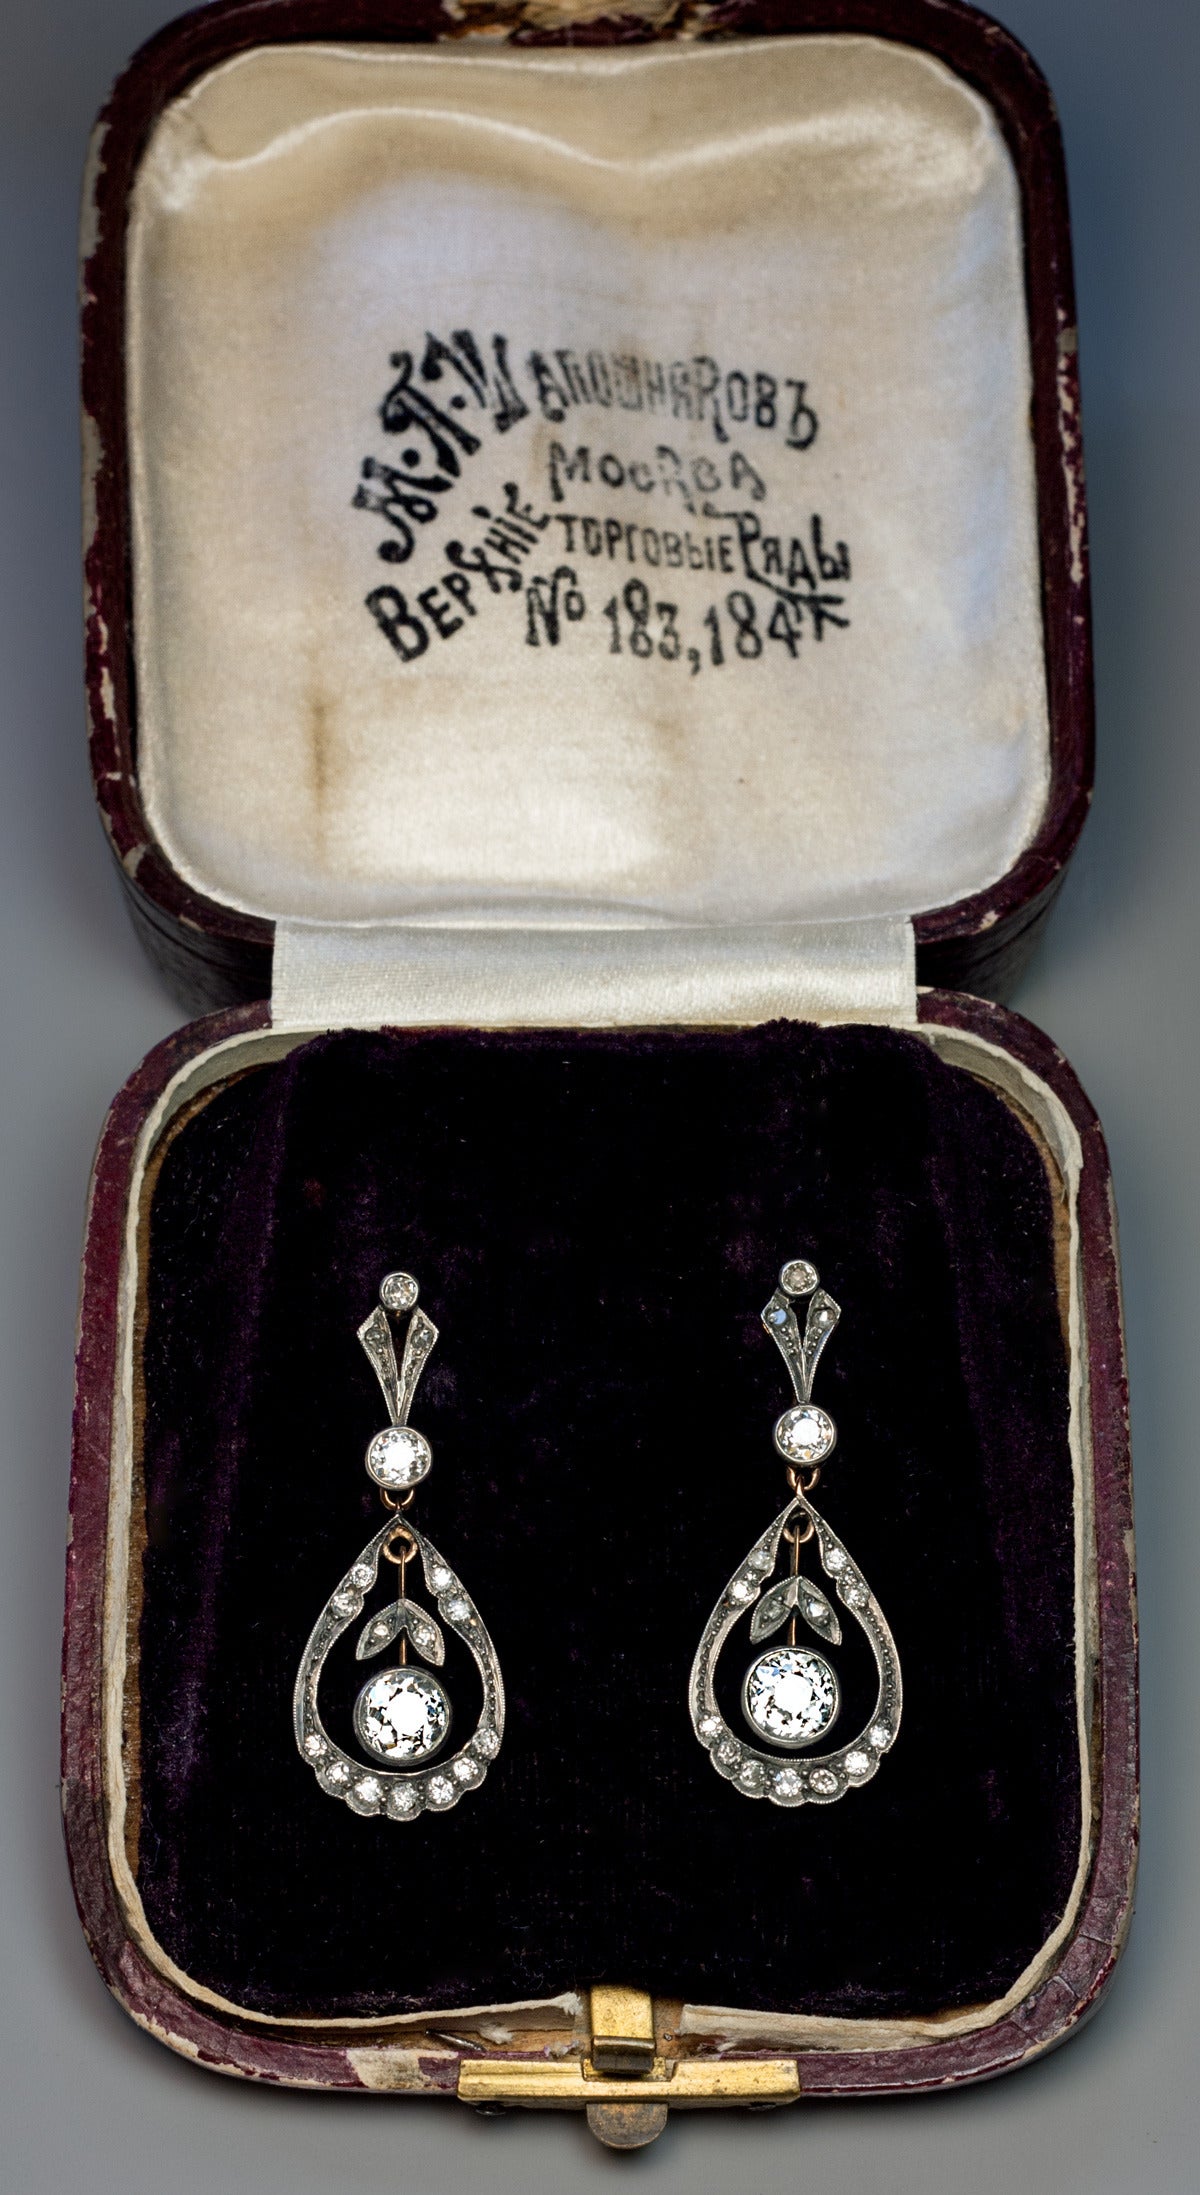 Made in Moscow between 1908 and 1917

The silver topped 14K gold earrings feature two bright white and sparkling old cut diamonds. 

Approximately 0.87 ct and 0.93 ct

They hang inside drop shaped frames embellished with diamonds.

Estimated